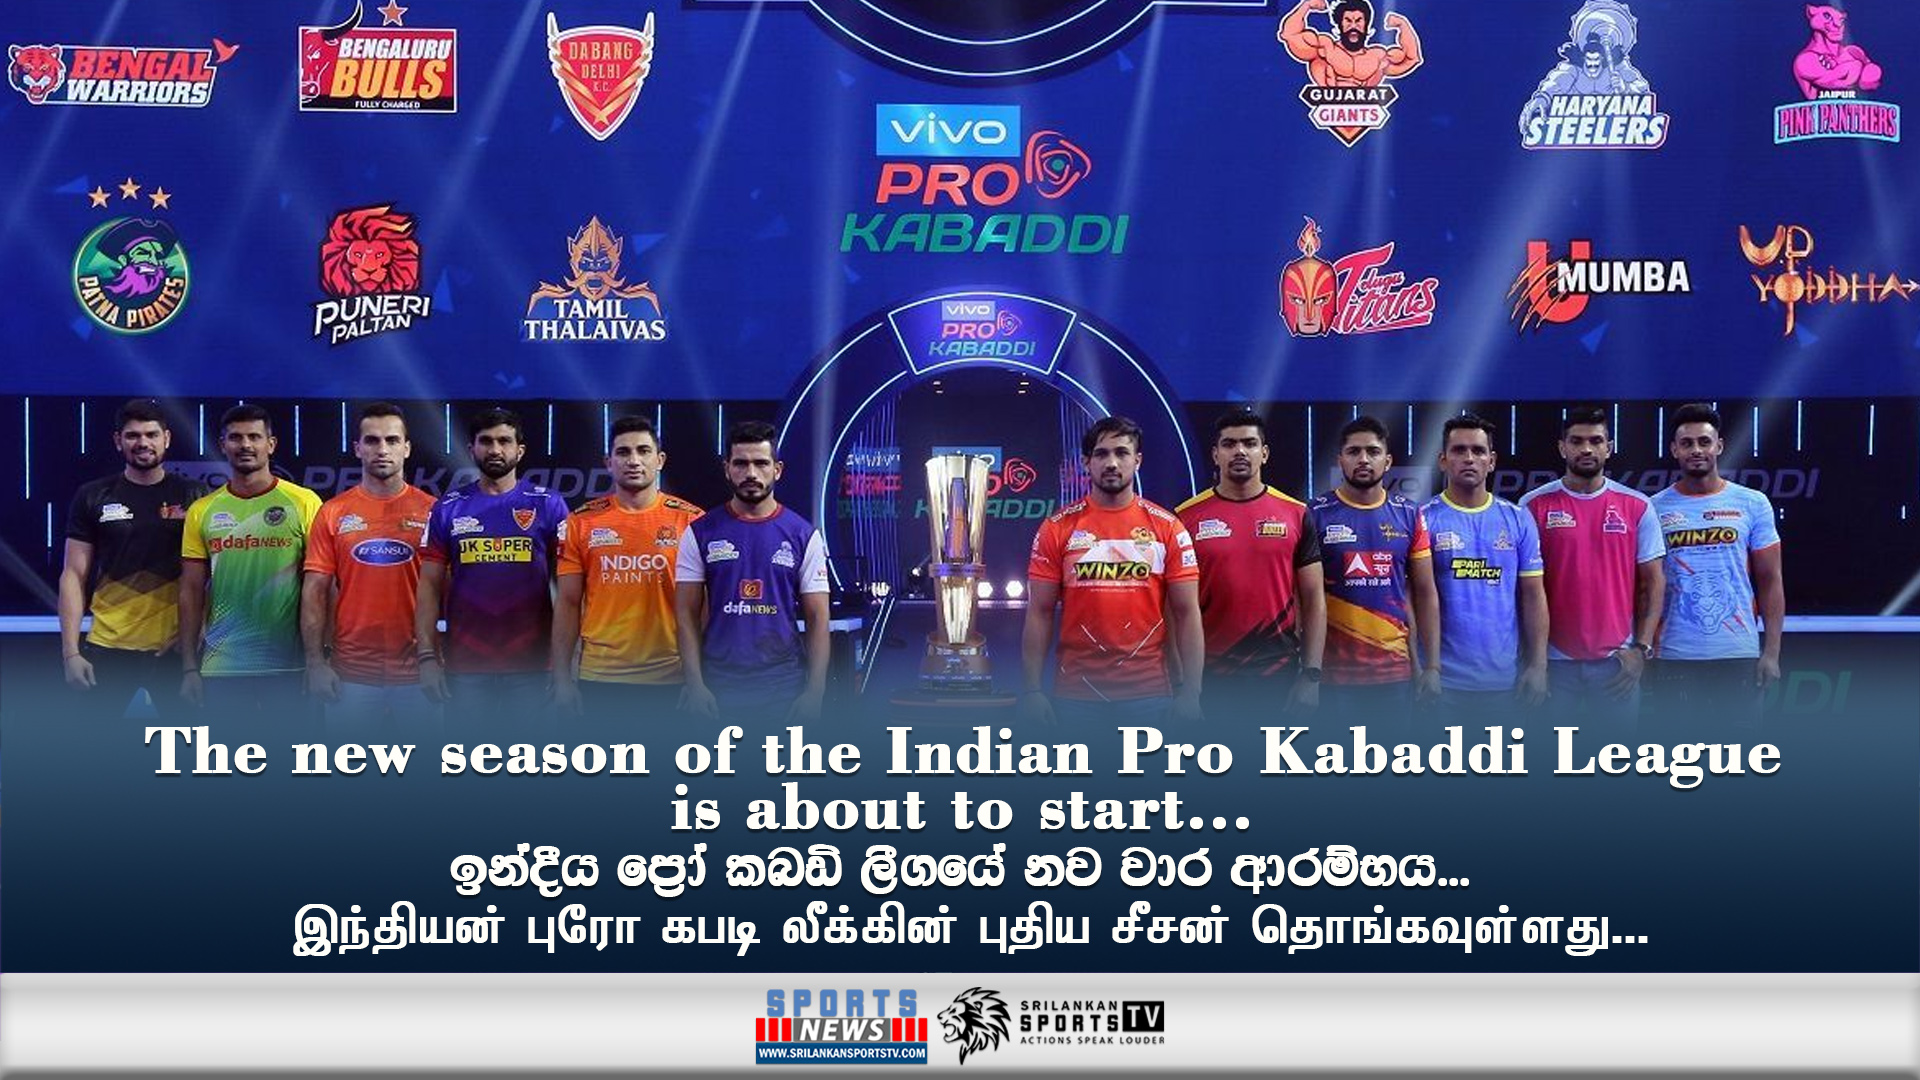 The new season of the Indian Pro Kabaddi League is about to start…